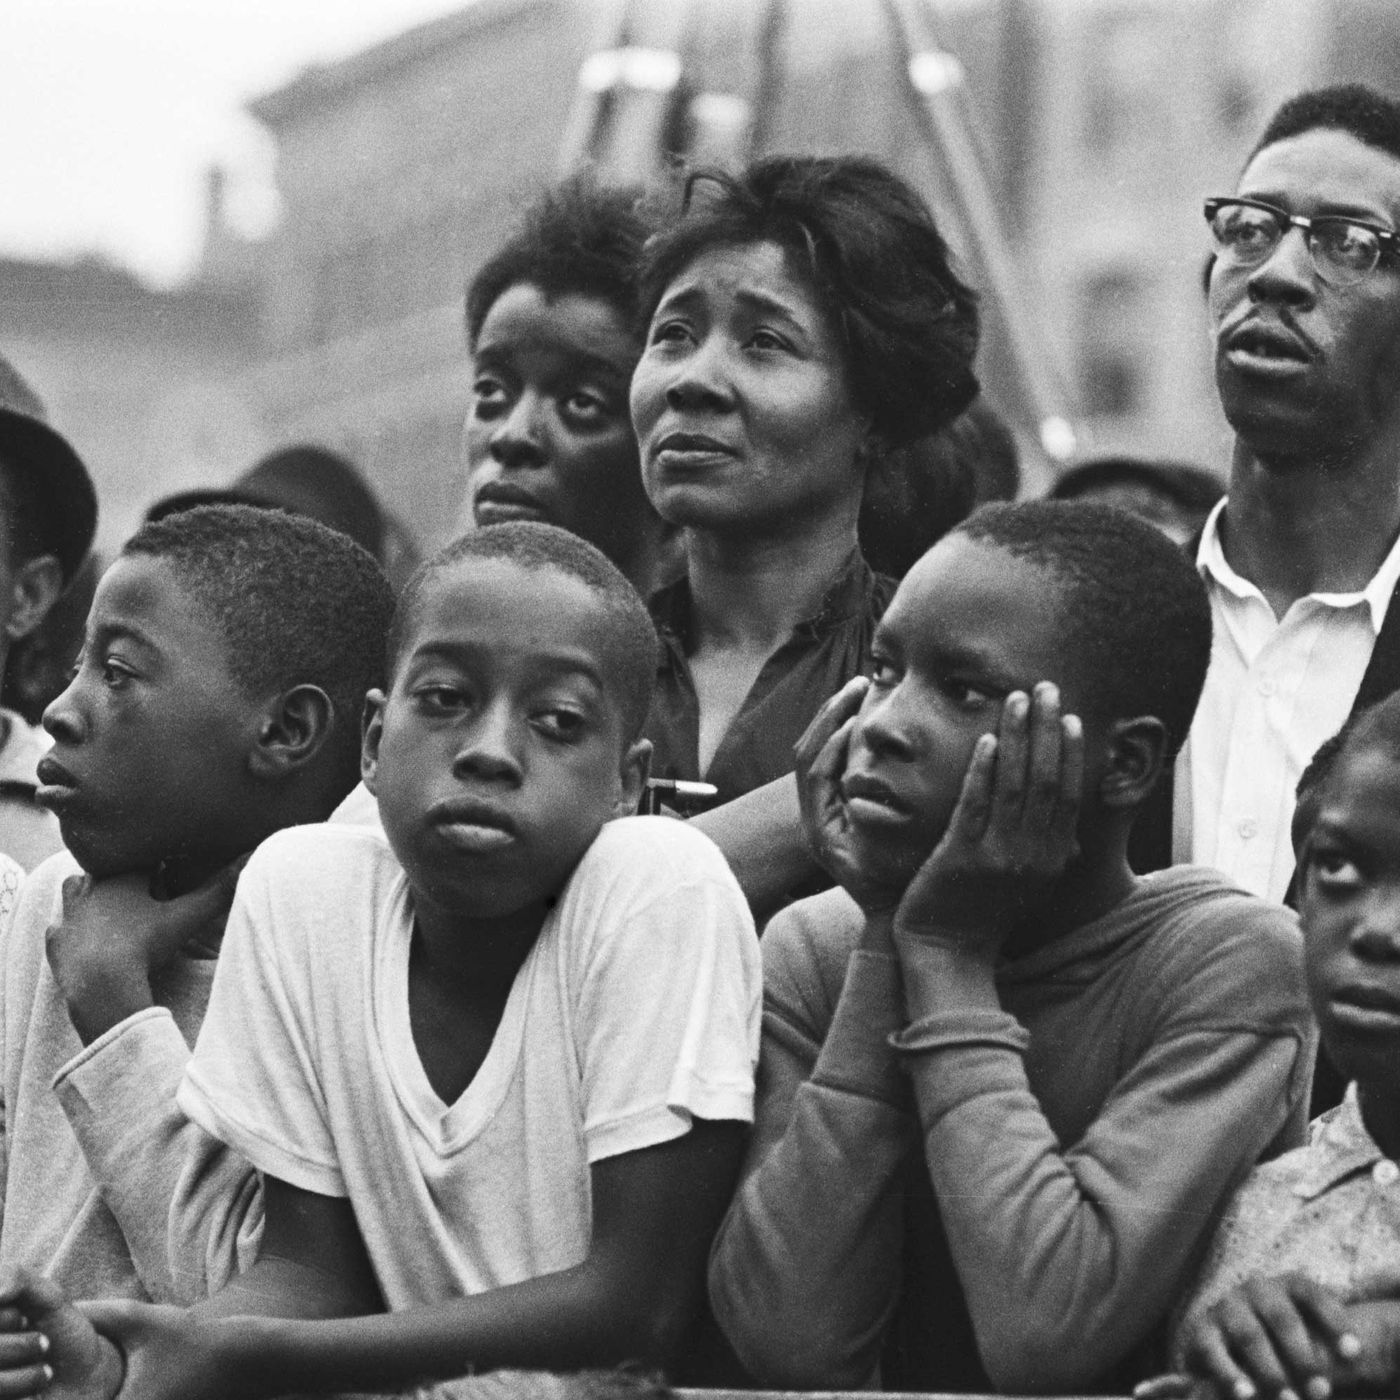 Black History Month: 6 myths about the history of Black people